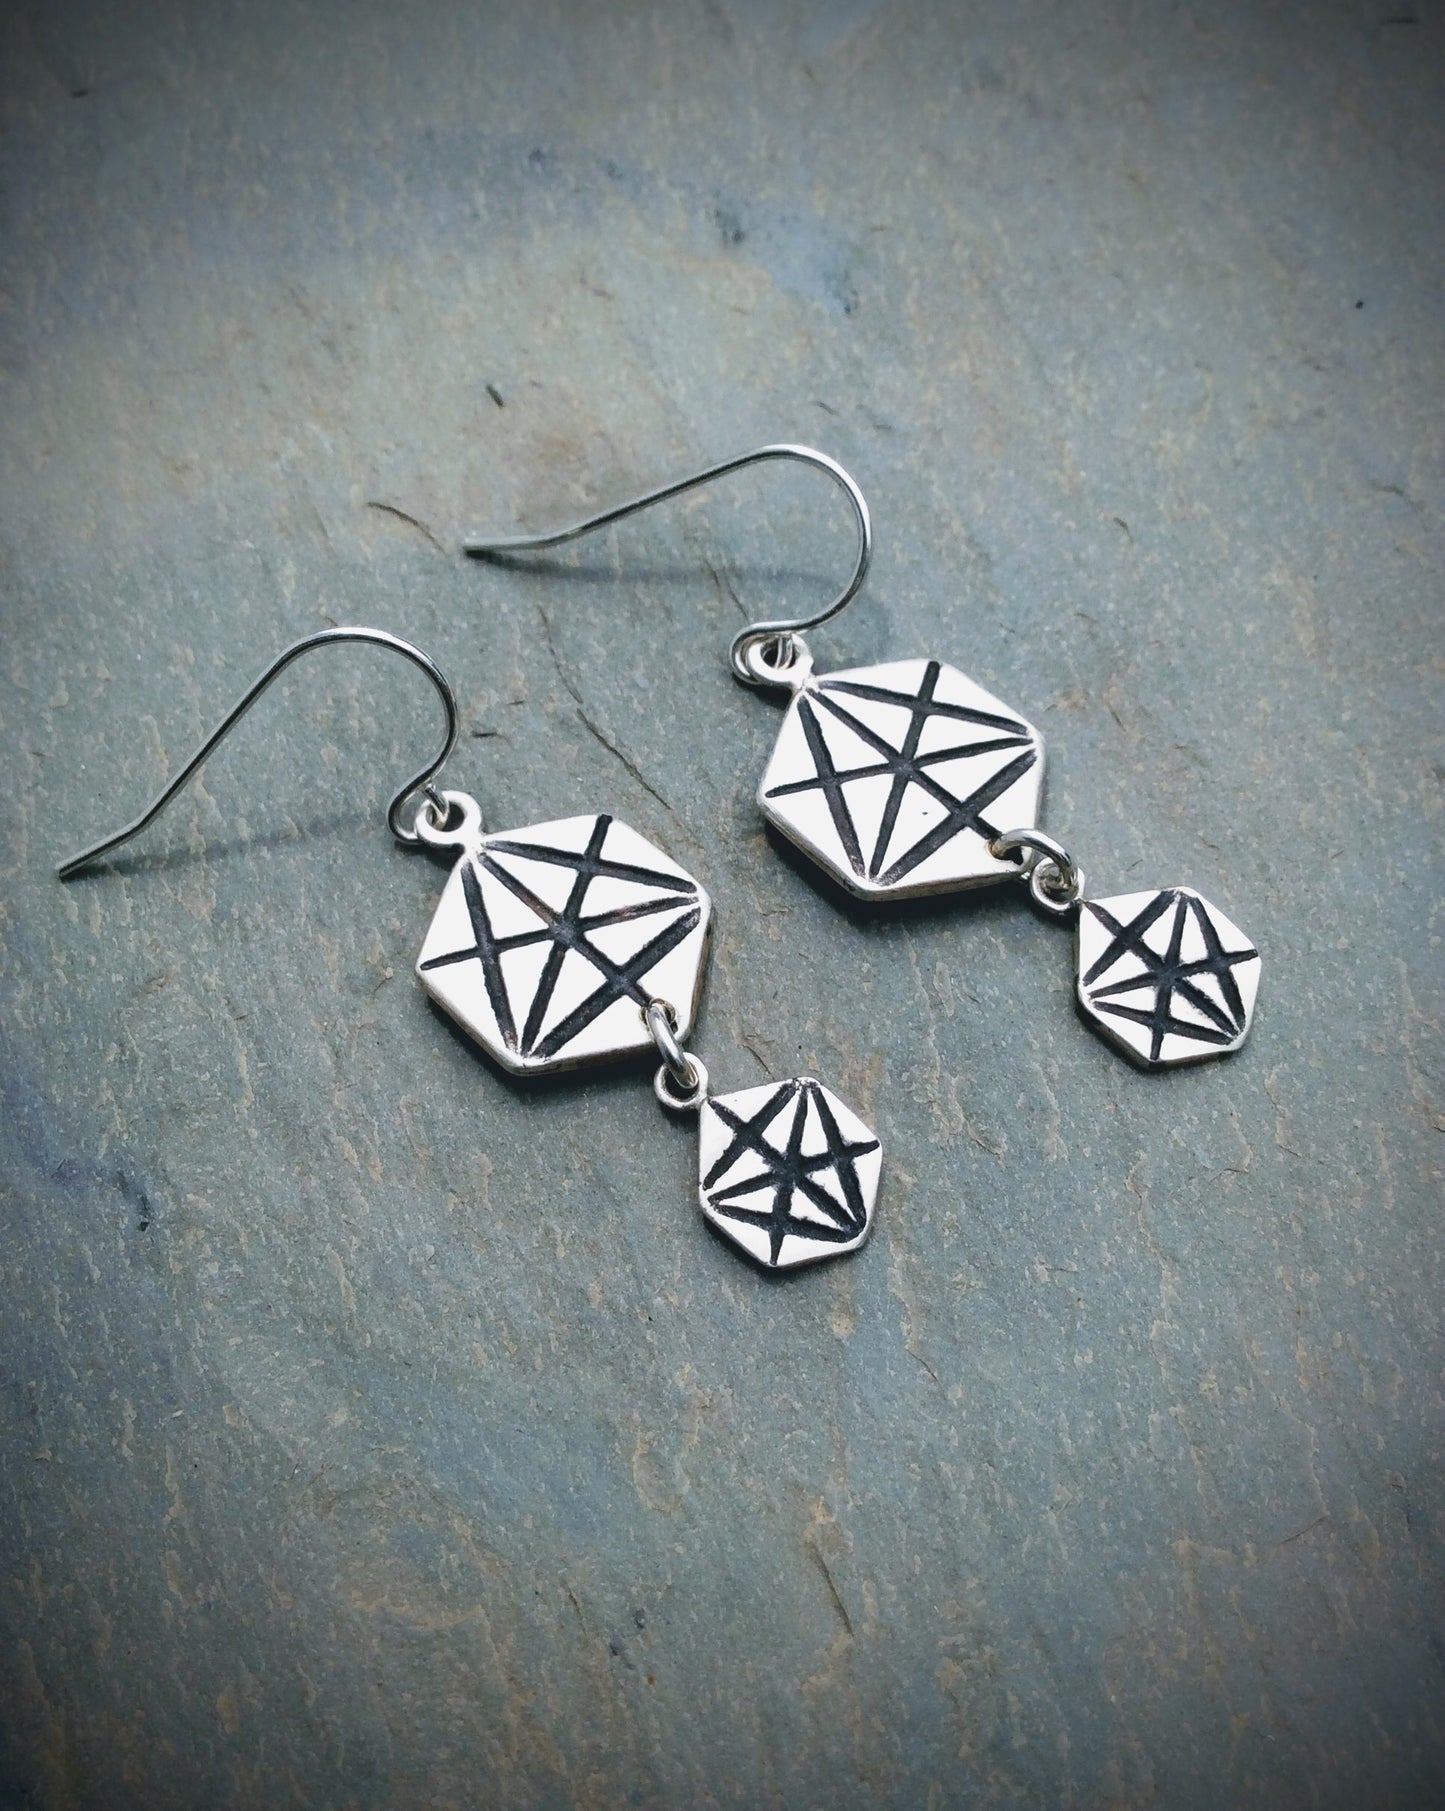 Double Merkaba Drop Earrings    Available in Sterling Silver or Bronze & 14K Gold Filled